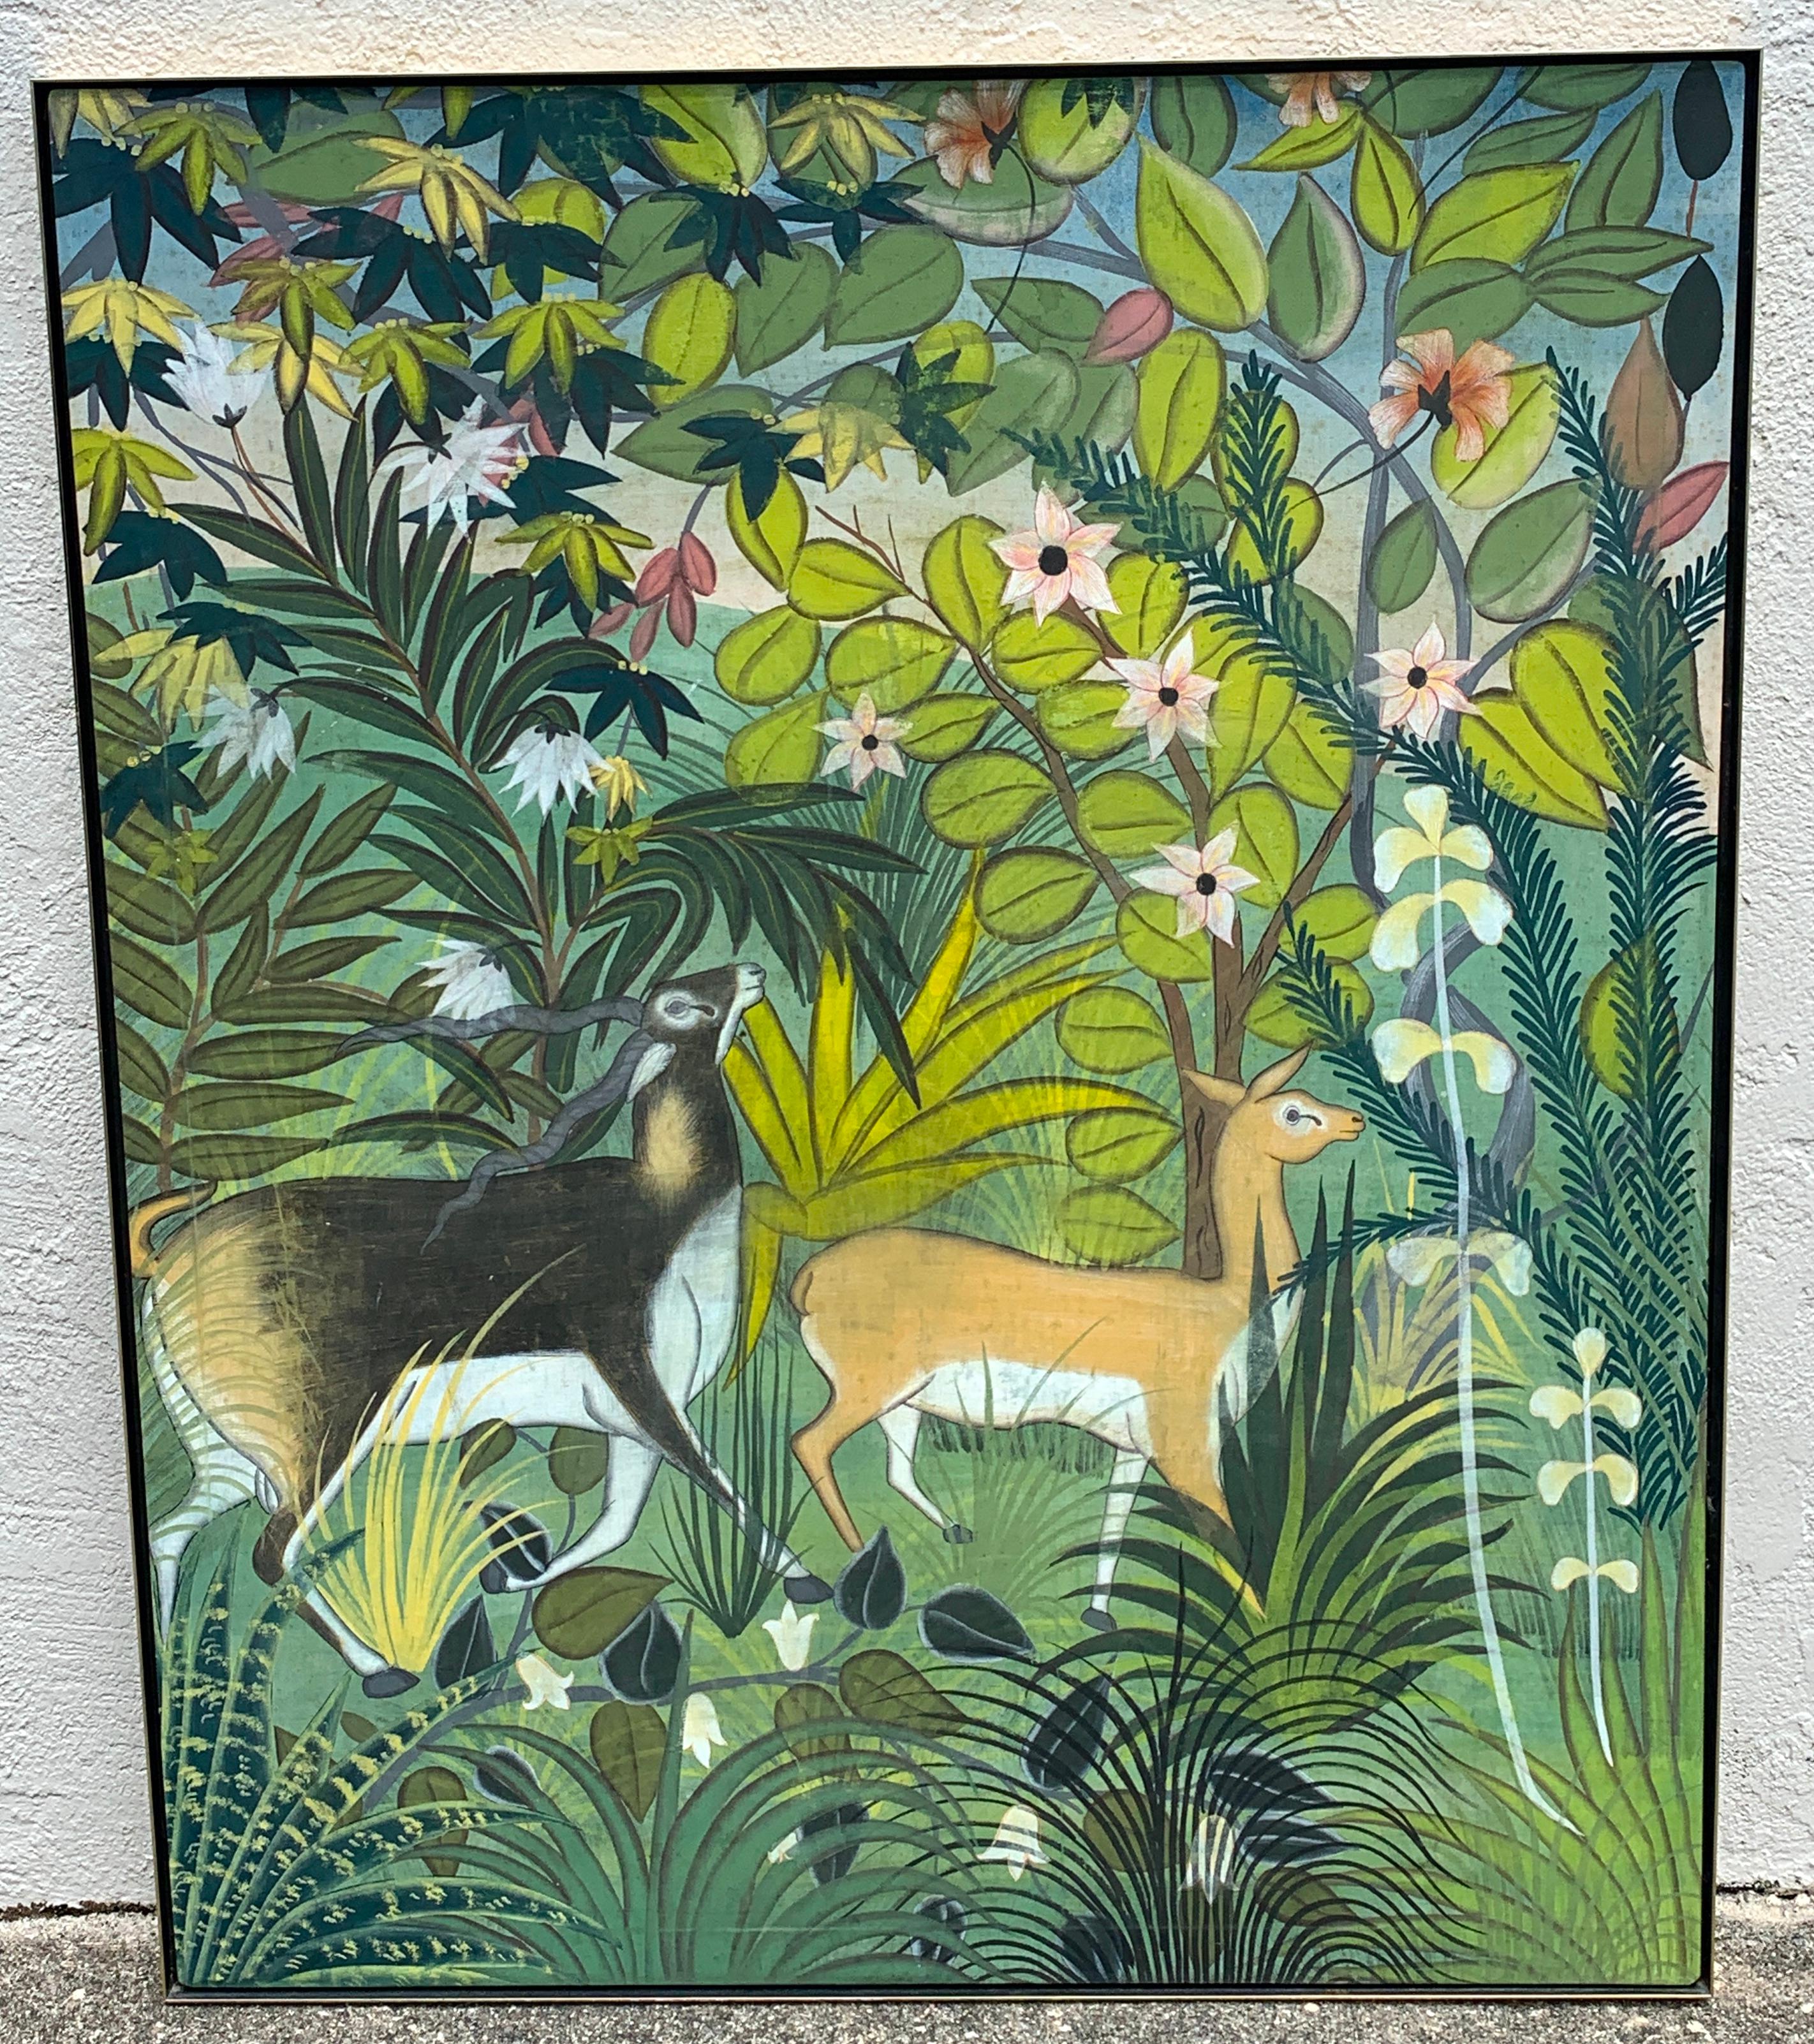 1970s Southeast Asian Batik style painting antelope in jungle
Great colors, finely detailed, mounted on wooden stretcher and framed
Work: 38